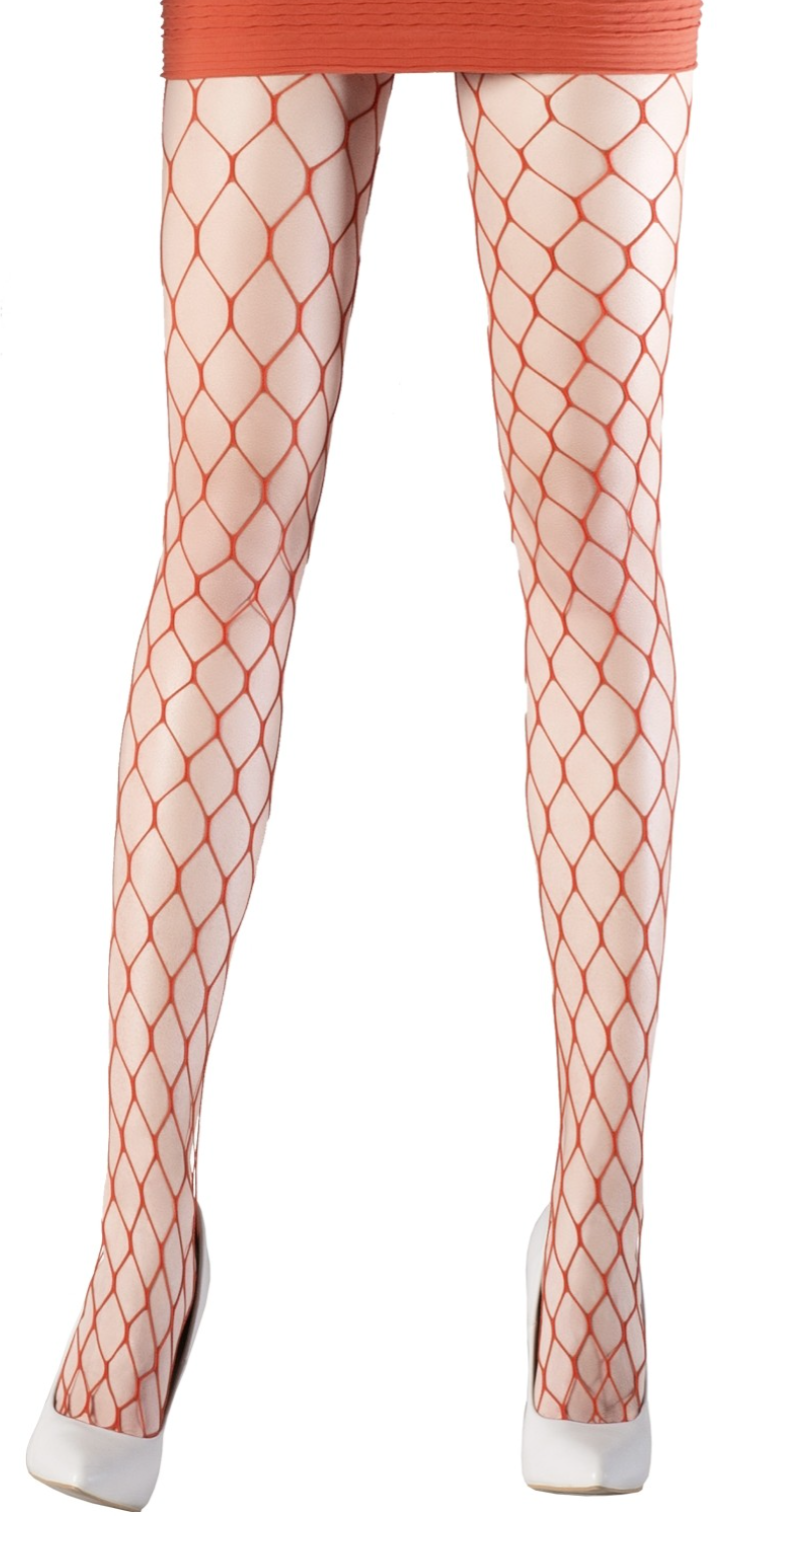 Emilio Cavallini Large Fishnet Tights - Extra wide orange fence fishnet tights with micro mesh toe.